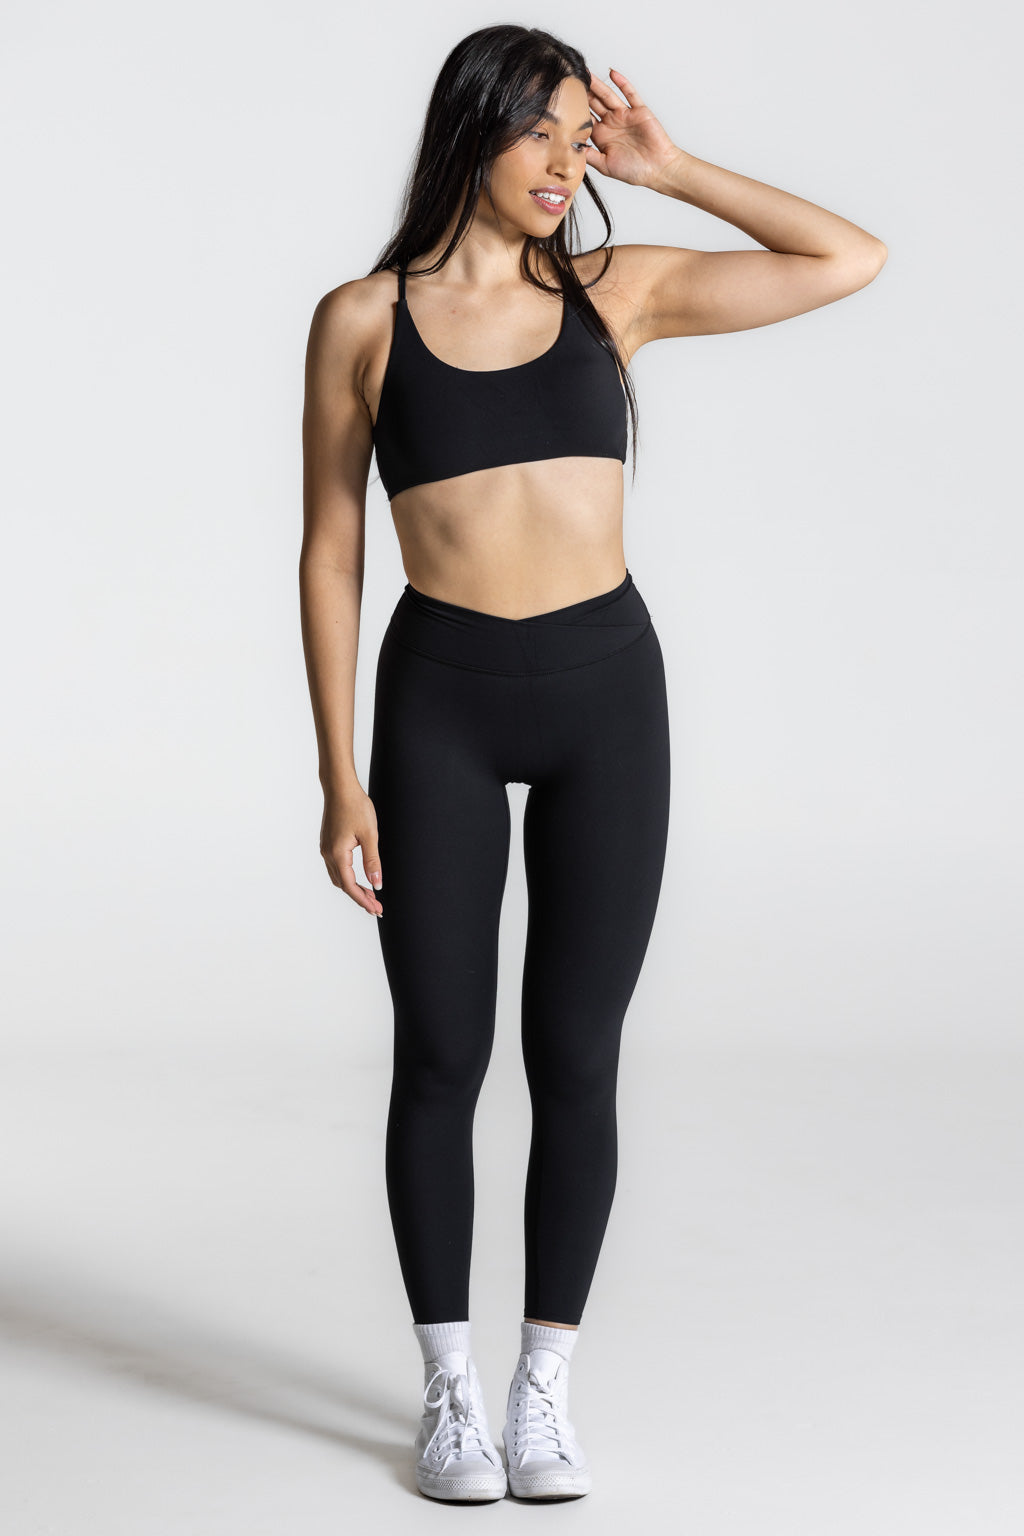 Base Crossover Tights Black by Alpha Fortis Streetwear